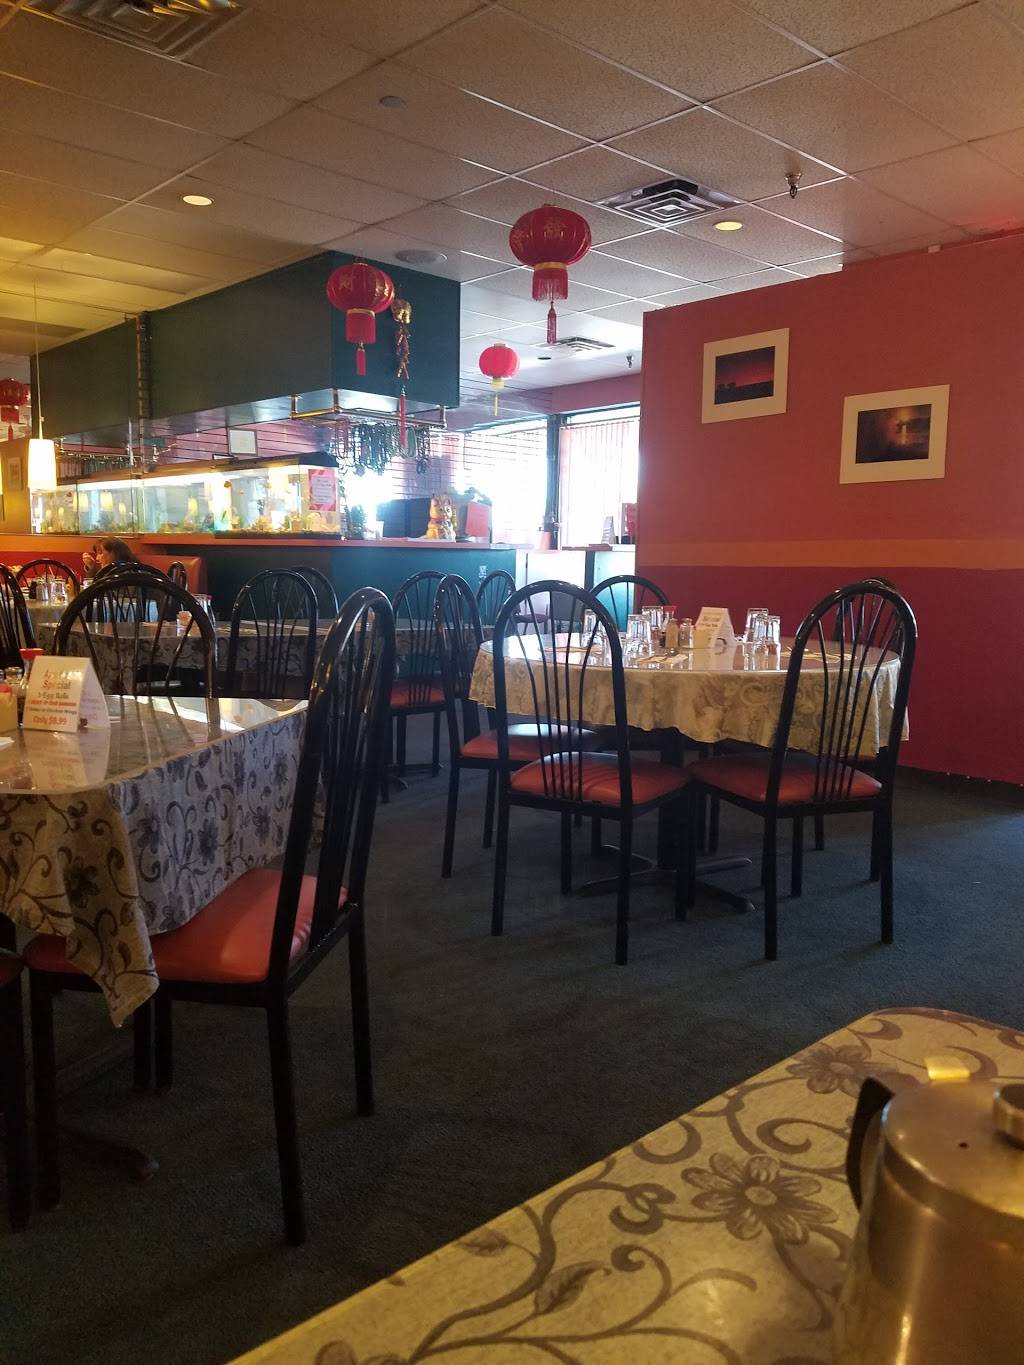 China Star | restaurant | # 11, 1820, 606 Taywood Rd, Englewood, OH 45322, USA | 9378367678 OR +1 937-836-7678